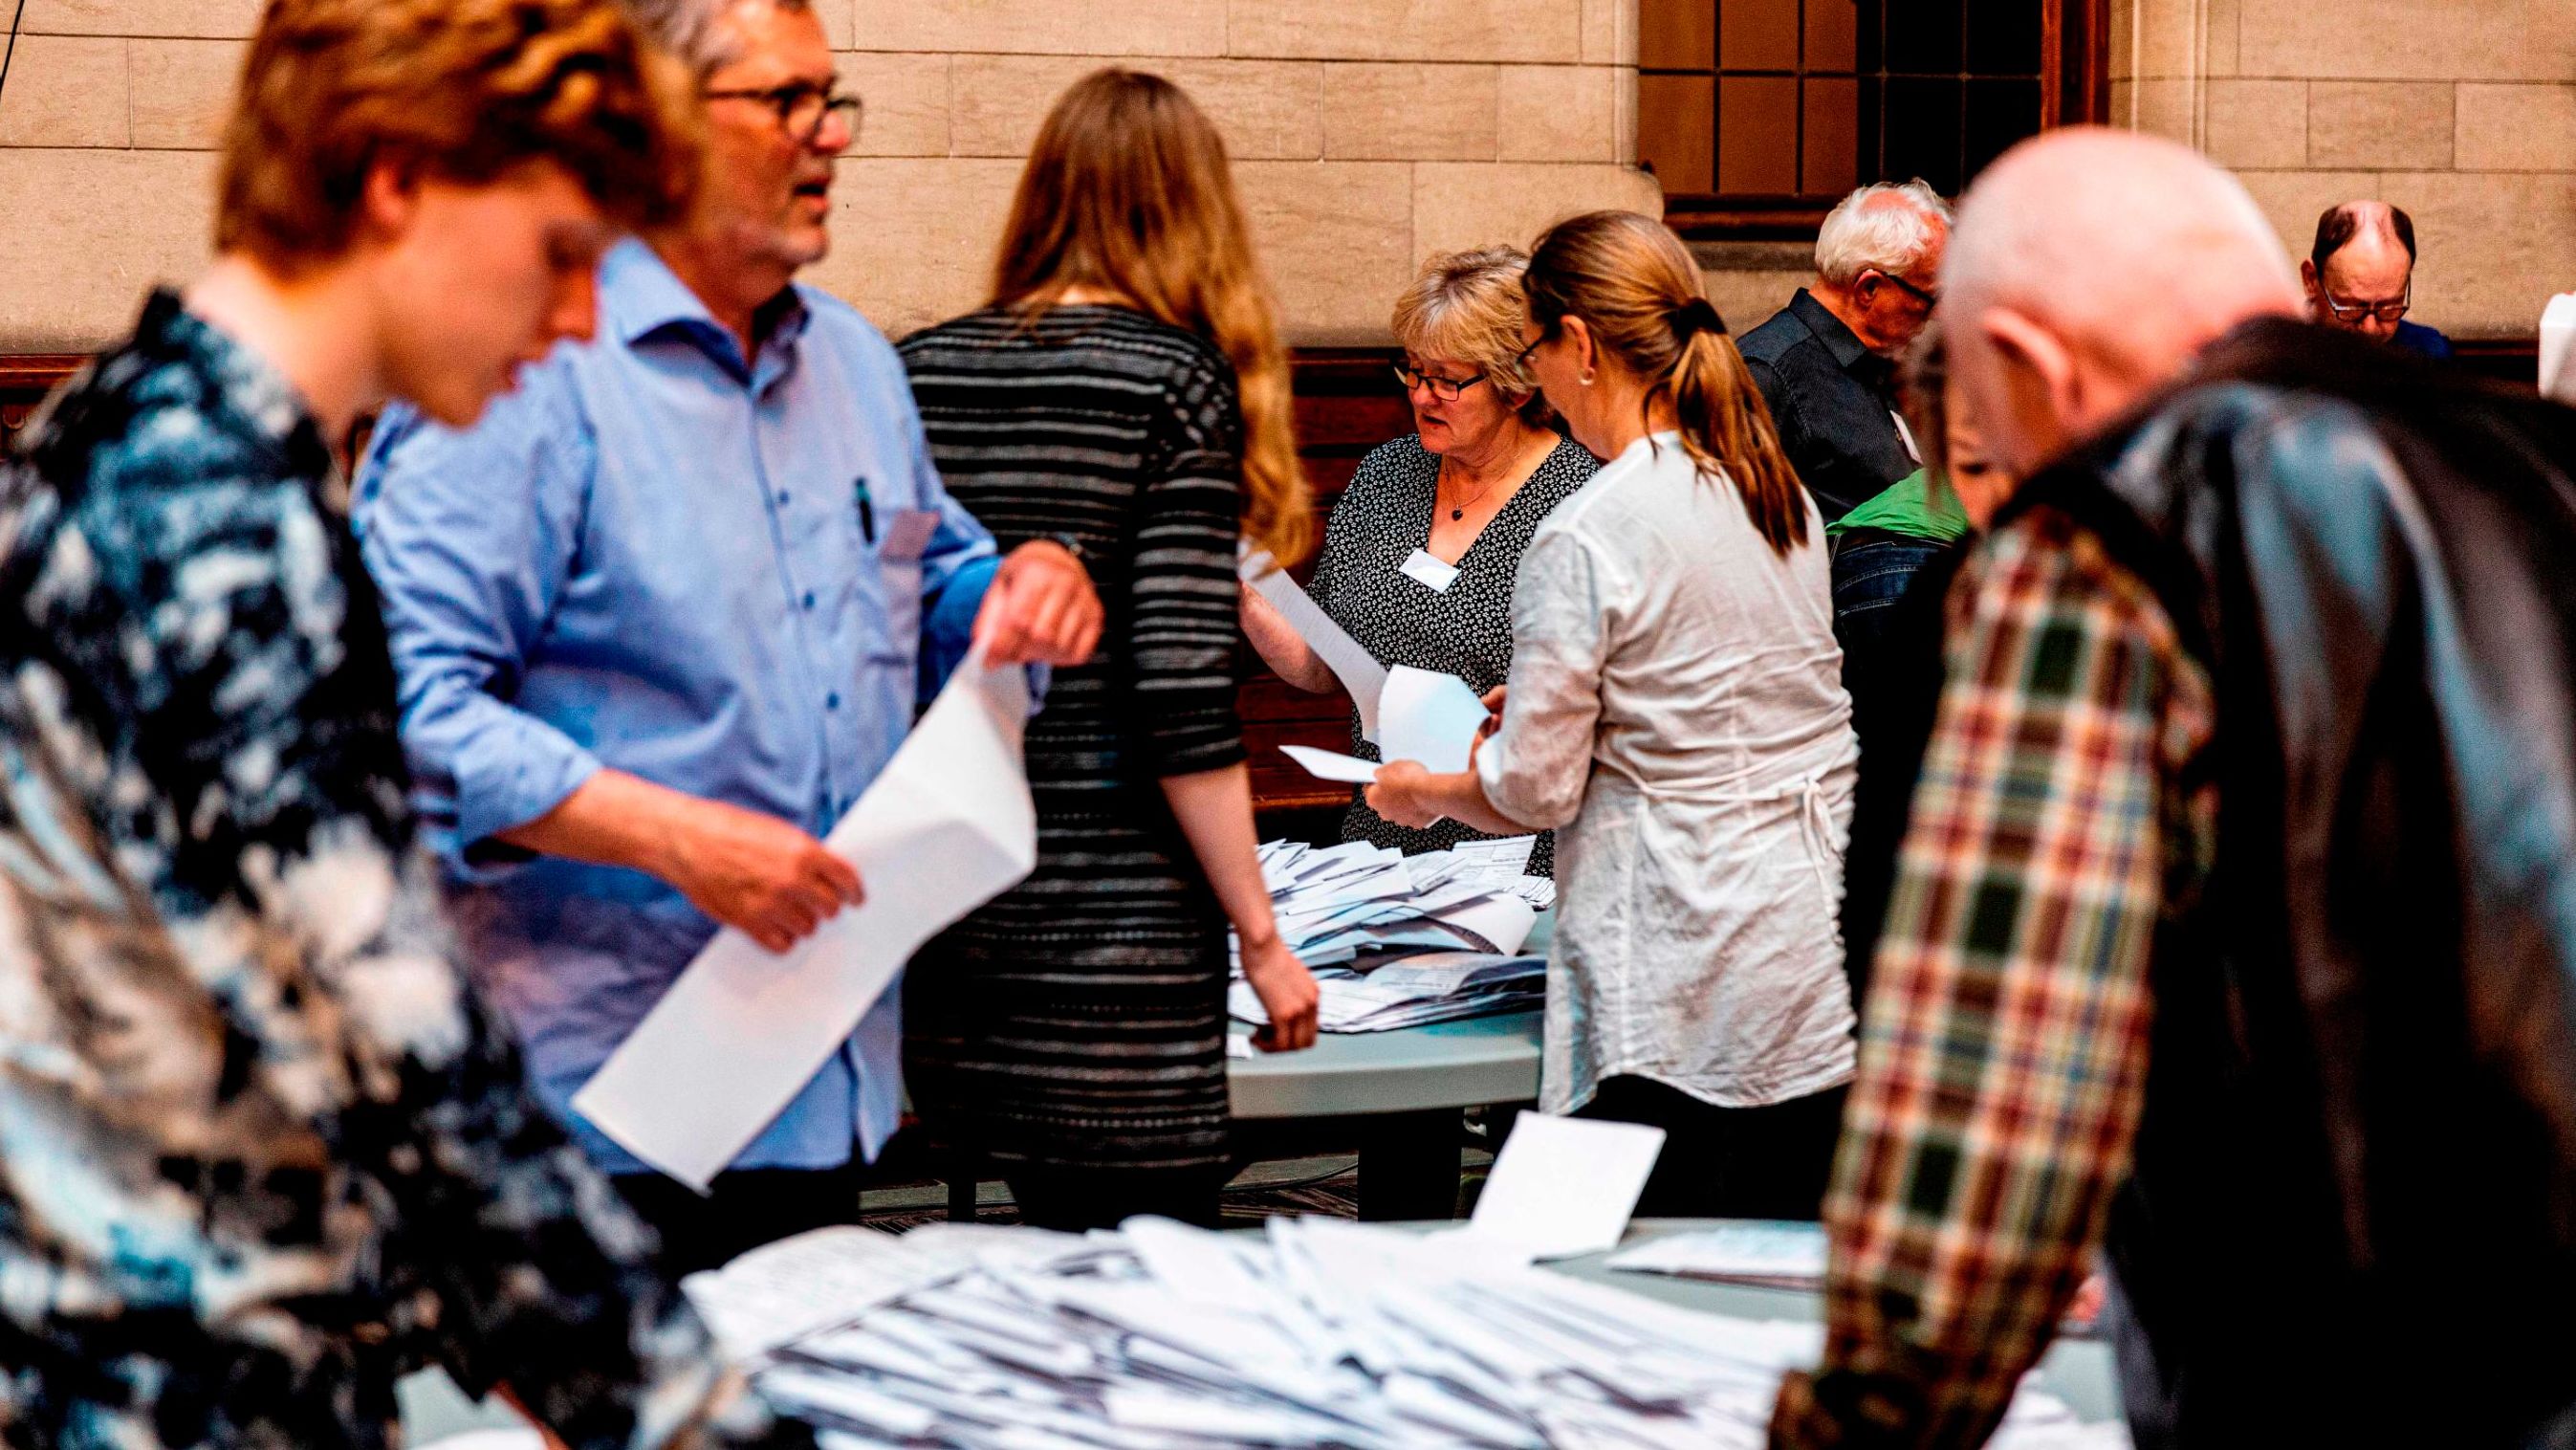 Ballots being counted after the polling stations closed in Copenhagen City Hall.